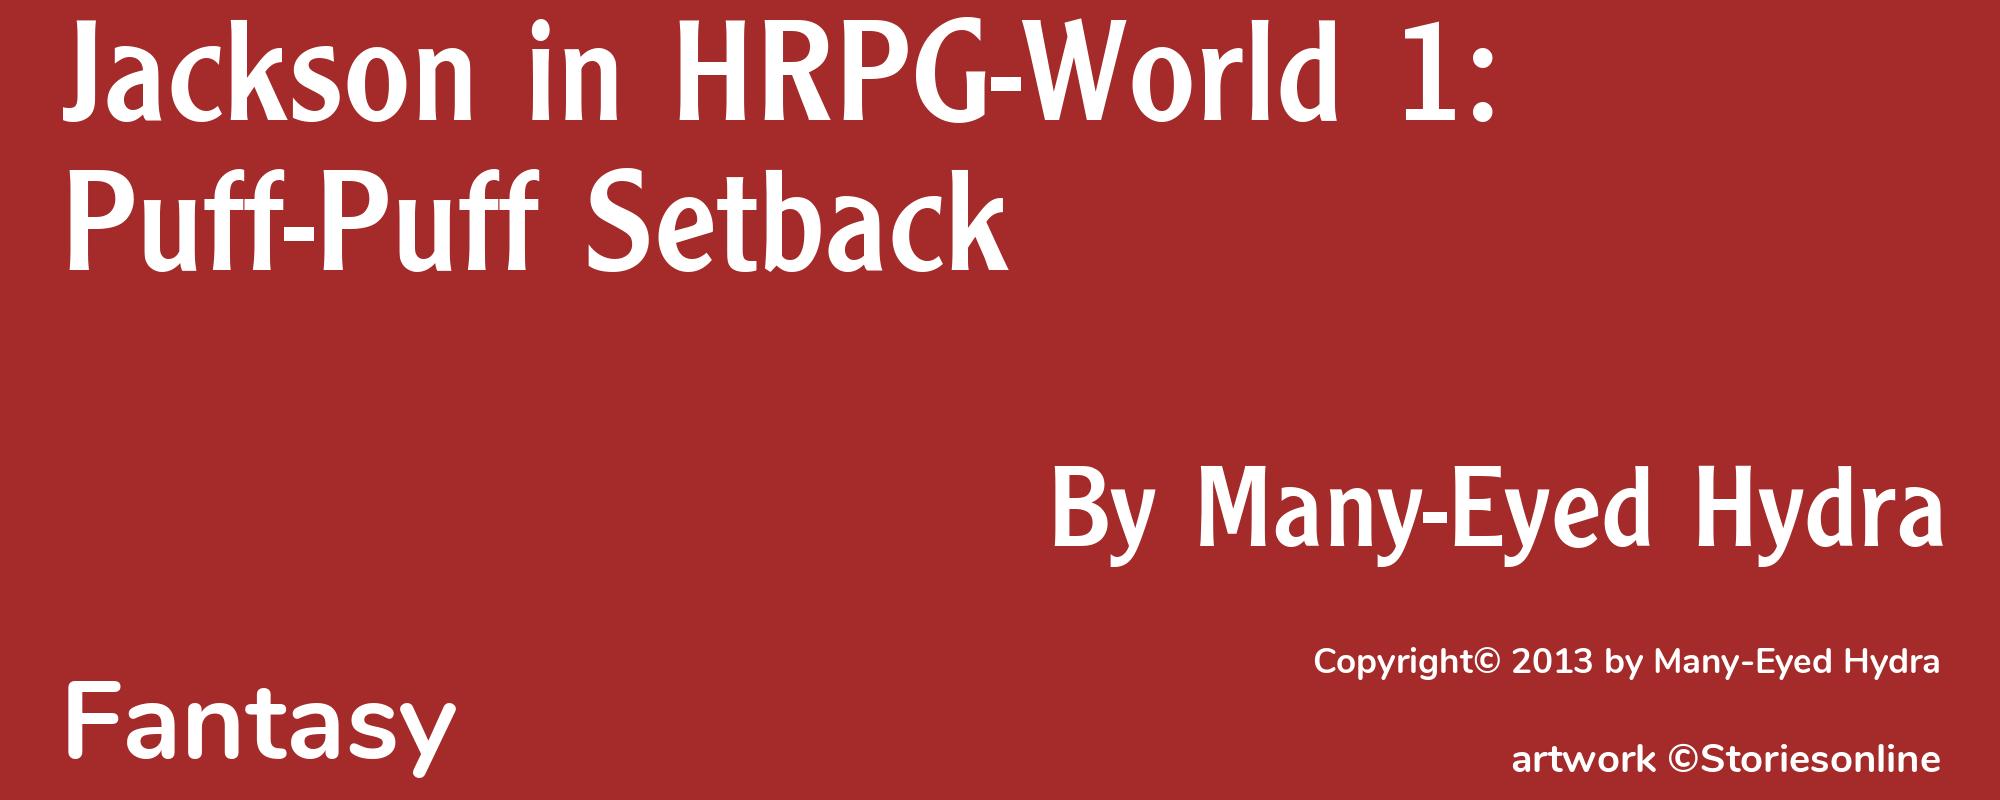 Jackson in HRPG-World 1: Puff-Puff Setback - Cover